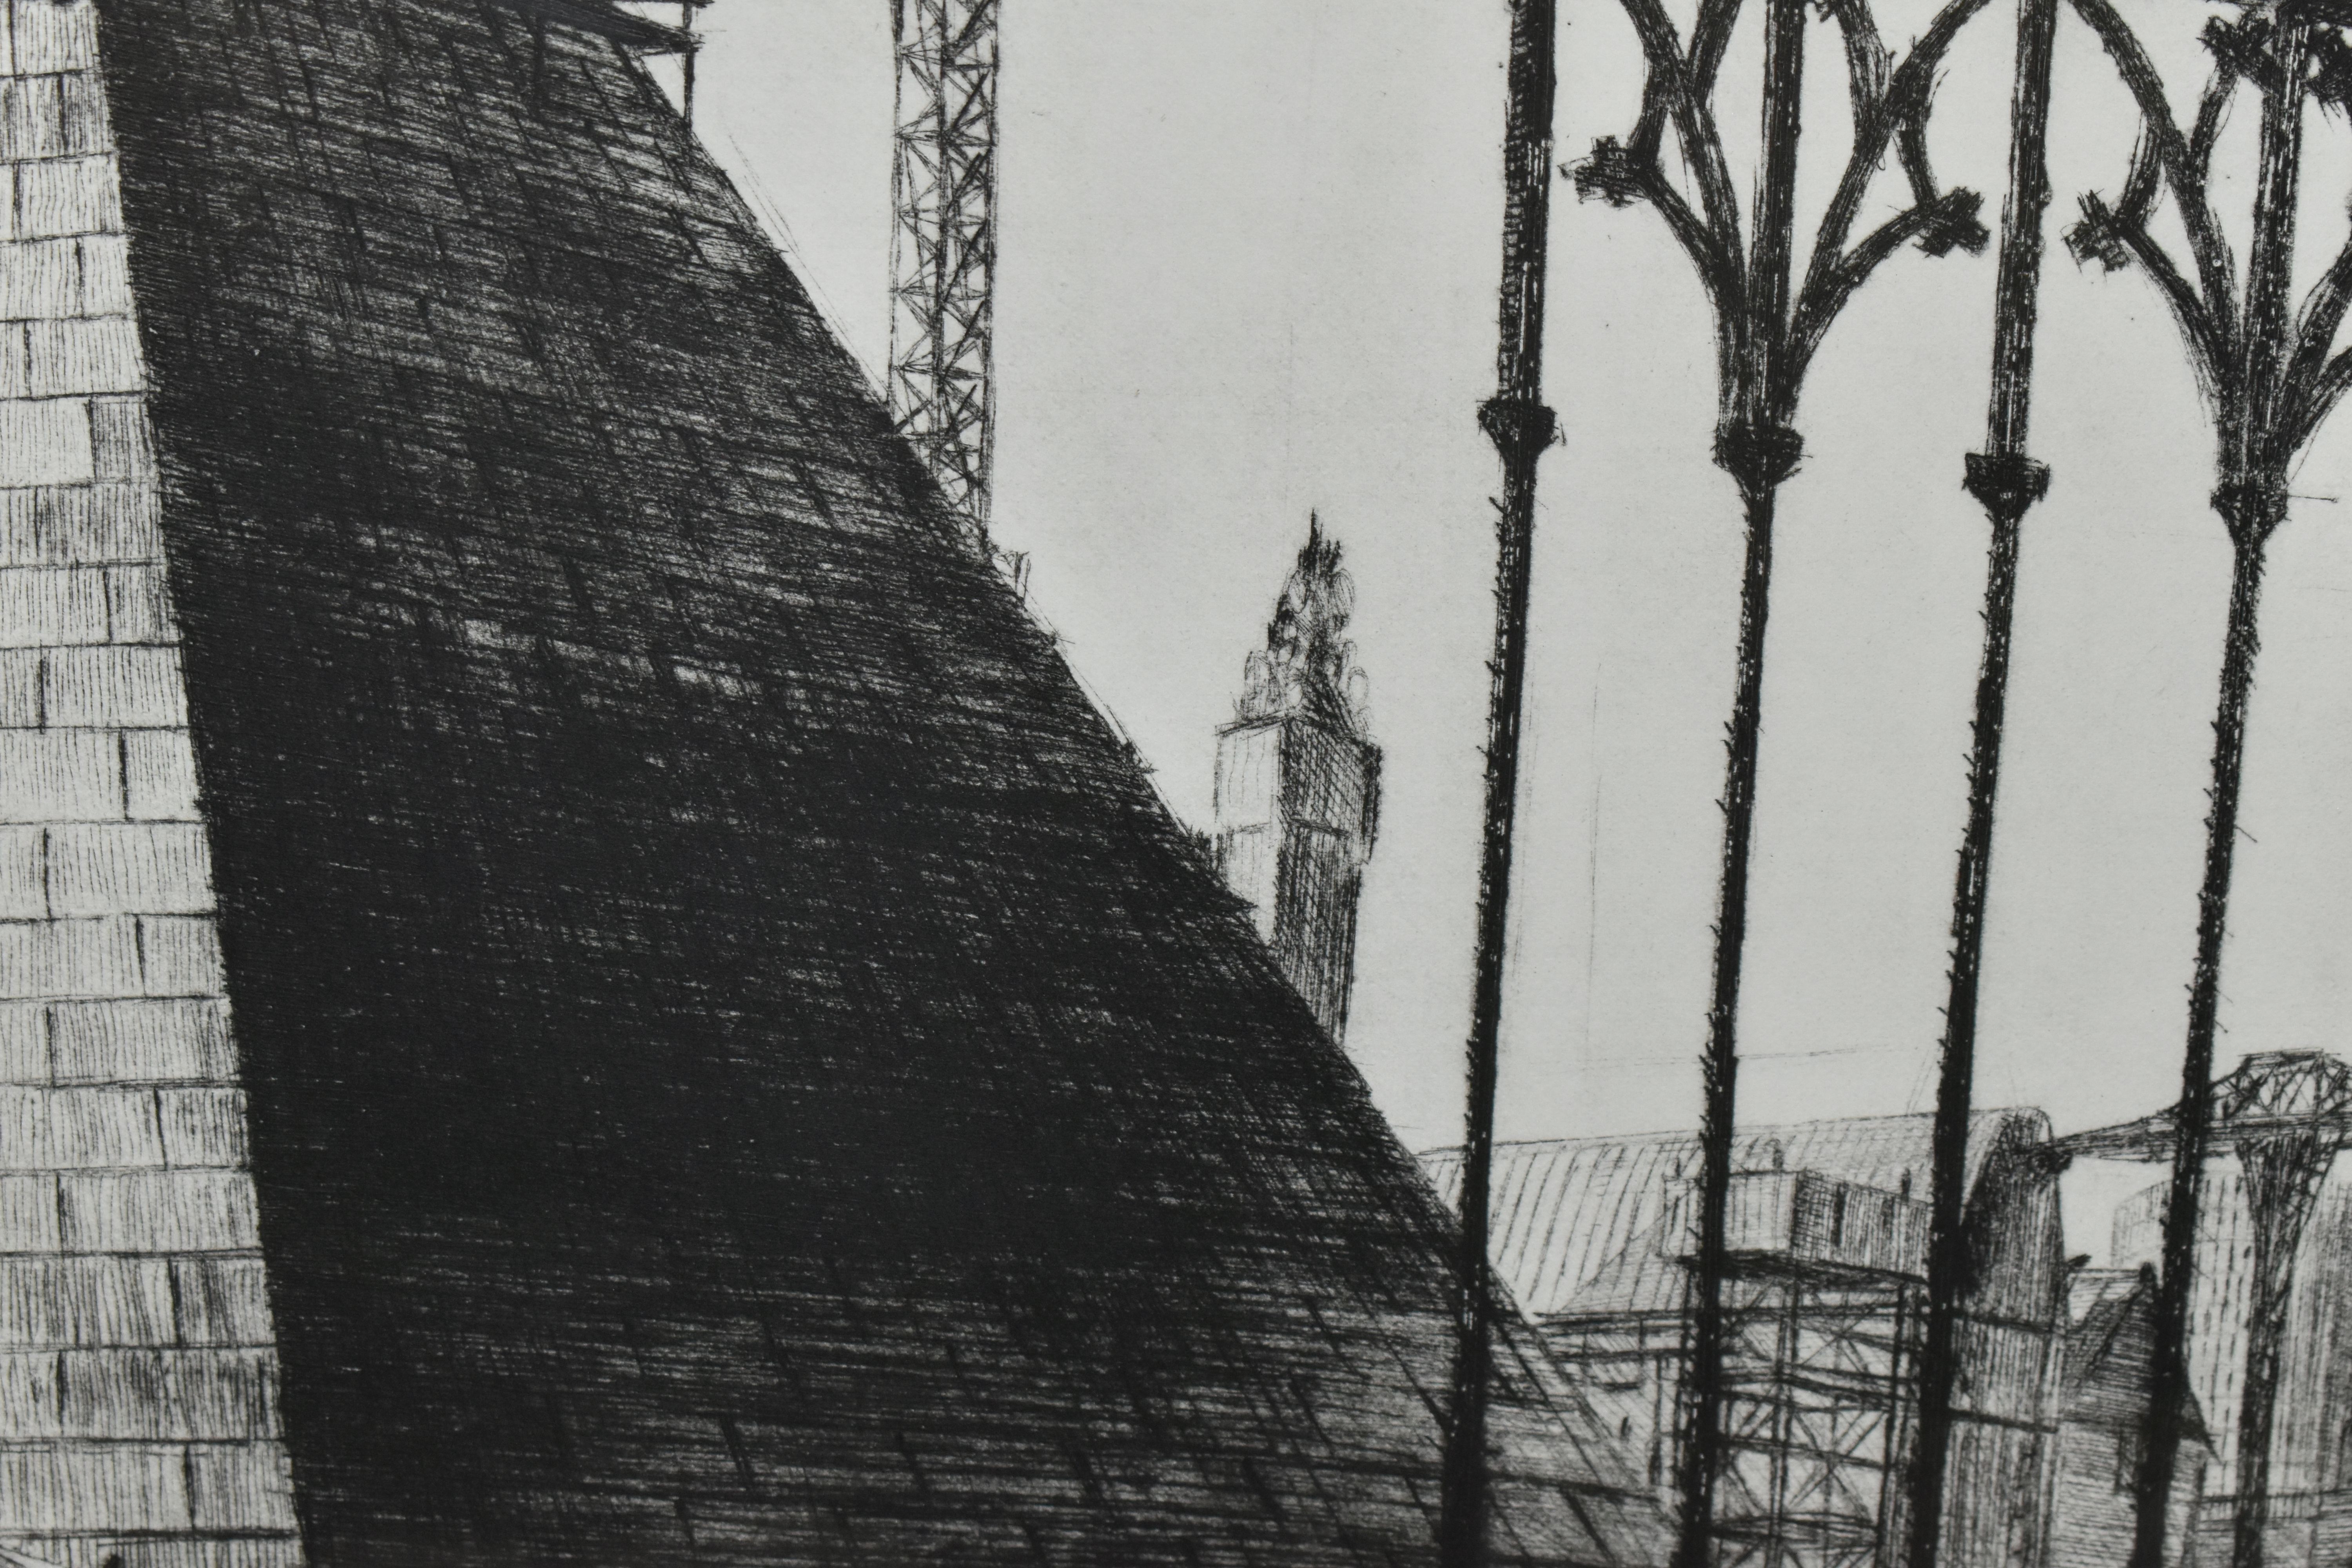 JOHN HOWARD (BRITISH 1958) 'PYRAMIDE DI BIRMINGHAM', a limited edition dry point etching depicting - Image 3 of 6